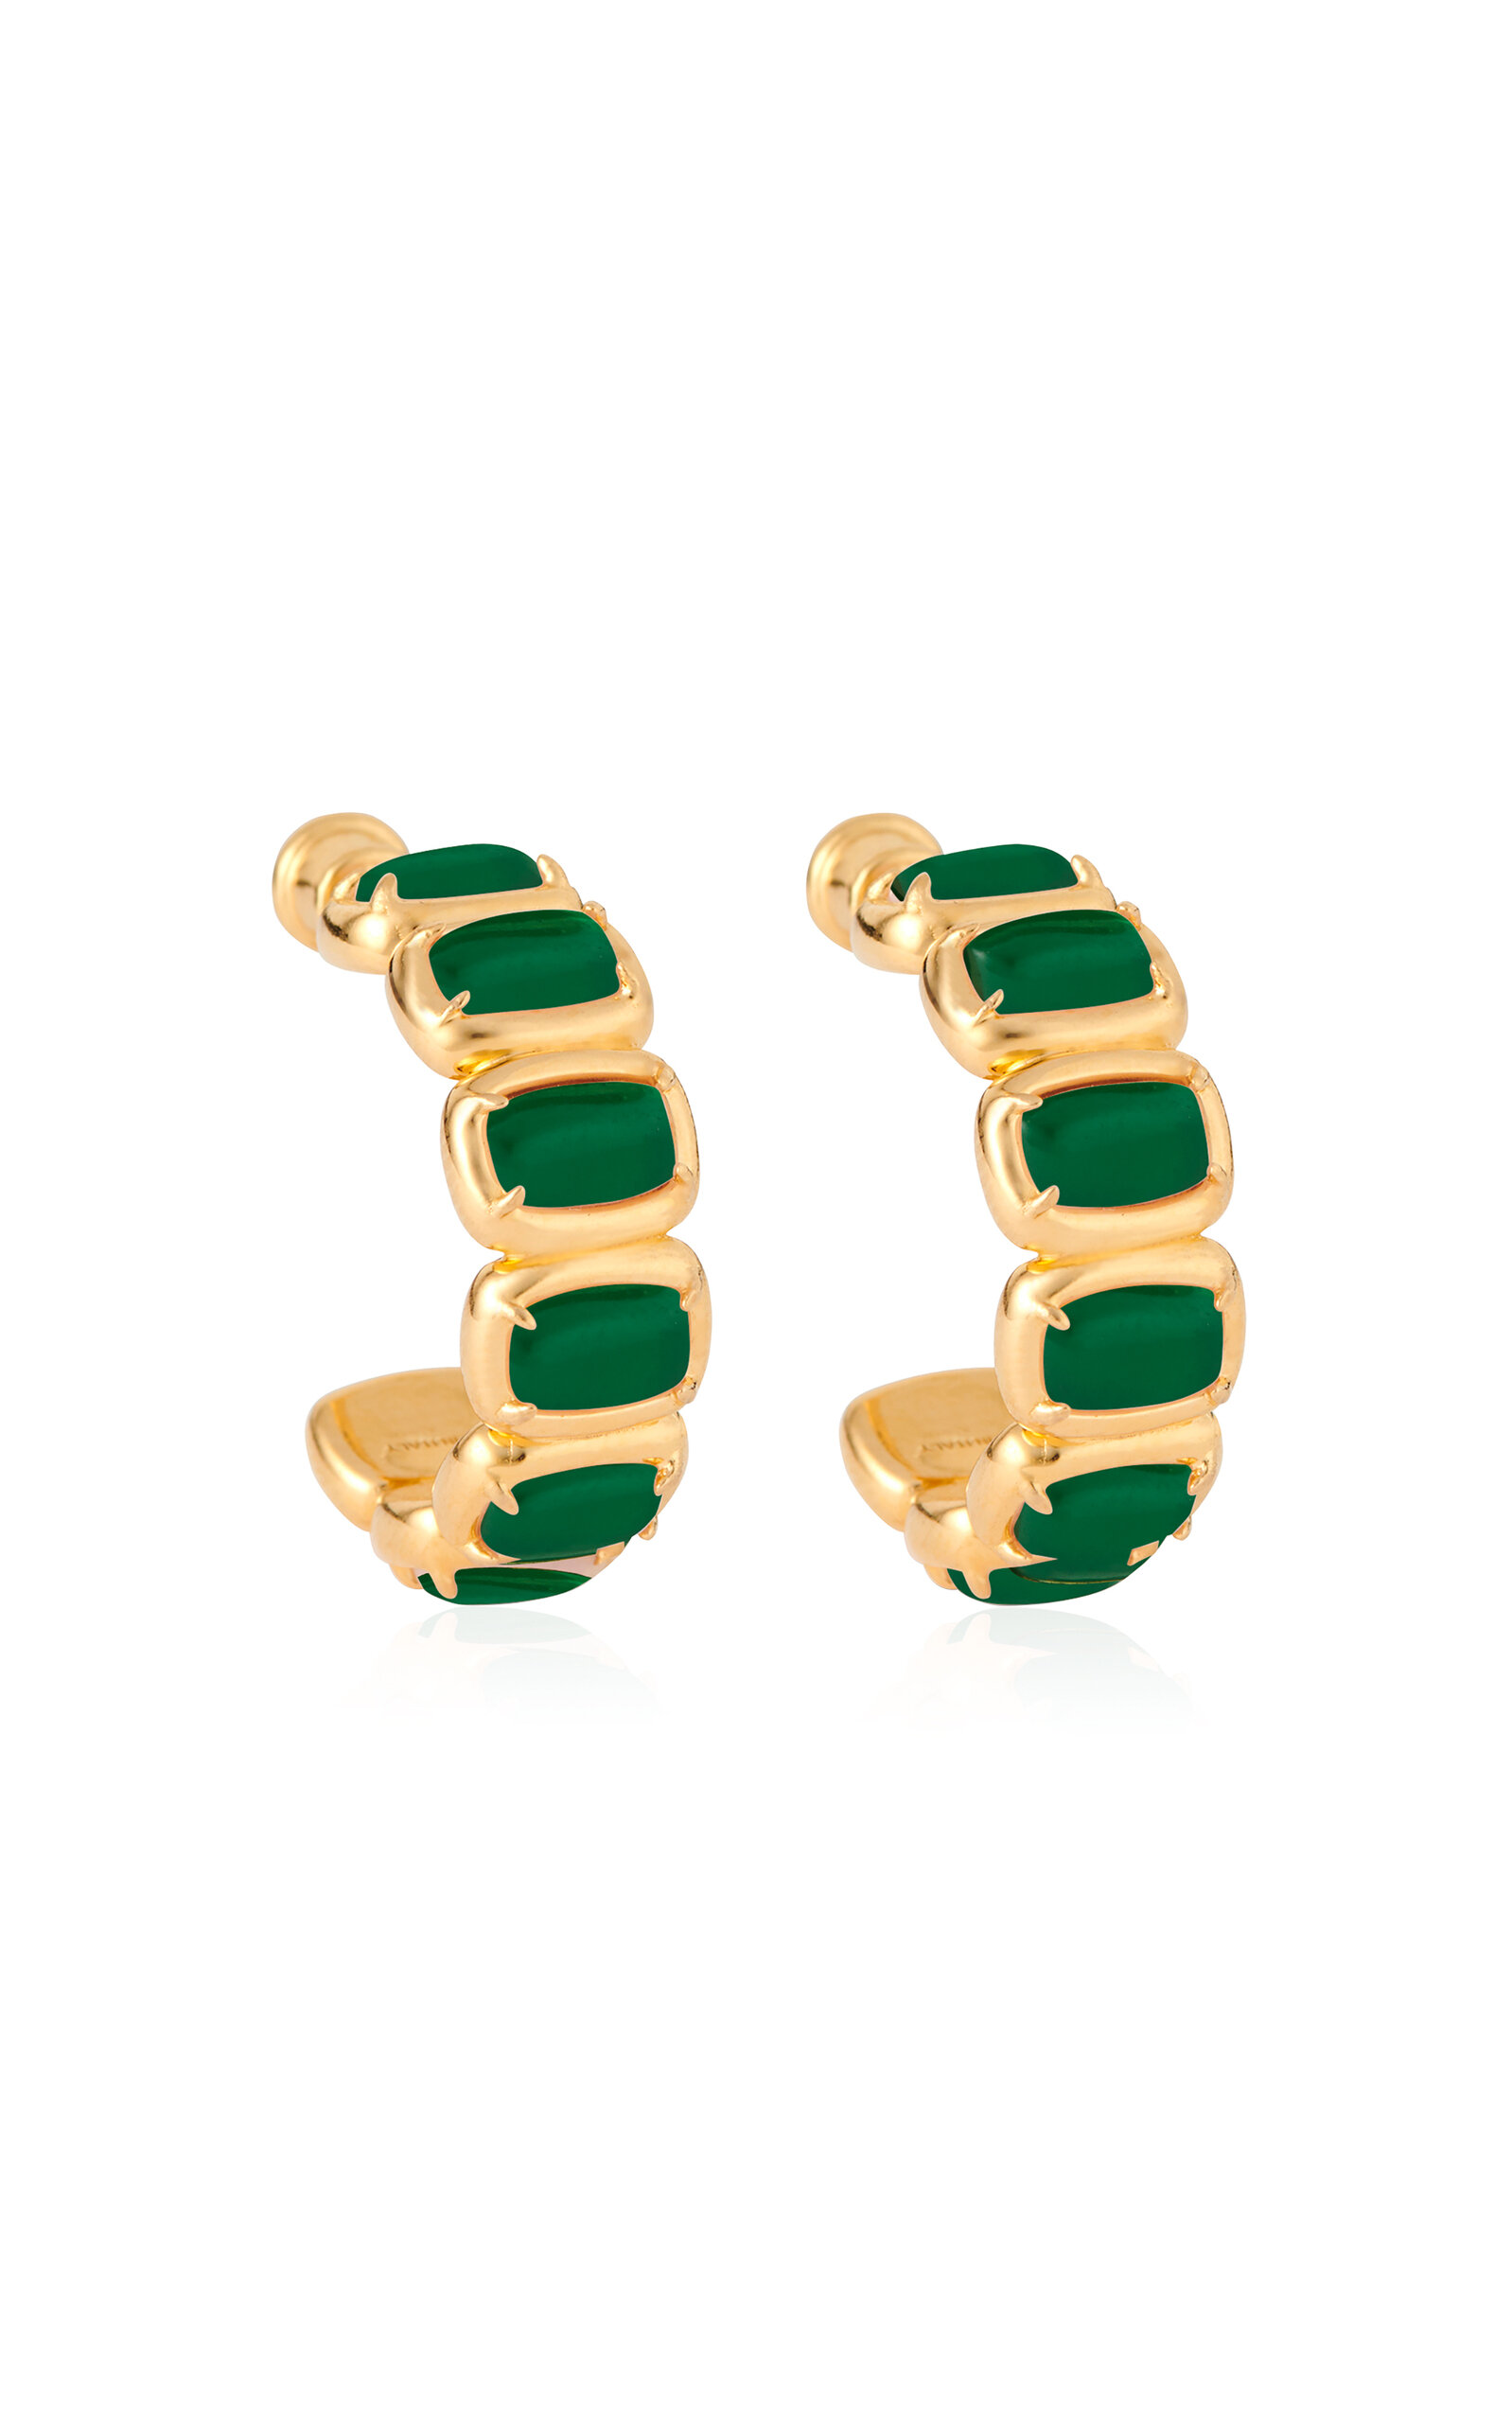 IVI Women's Small Toy 18k Gold-Plated Green Onyx Earrings